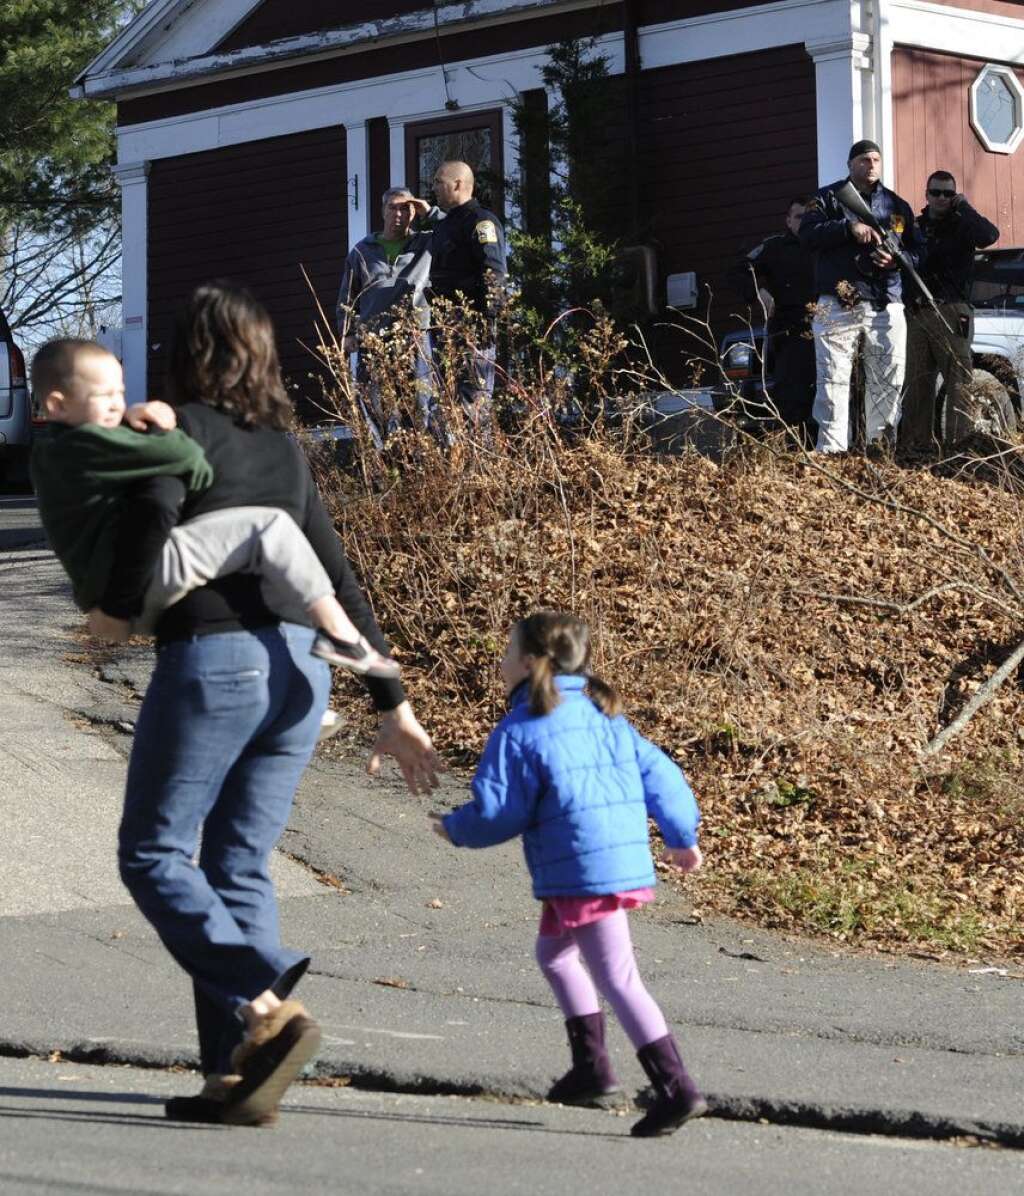 Sandy Hook Elementary School Shooting - A mother runs with her children as police above canvass homes in the area following a shooting at the Sandy Hook Elementary School in Newtown, Conn. where authorities say a gunman opened fire, leaving 26 people dead, including 20 children, Friday, Dec. 14, 2012. (AP Photo/Jessica Hill)